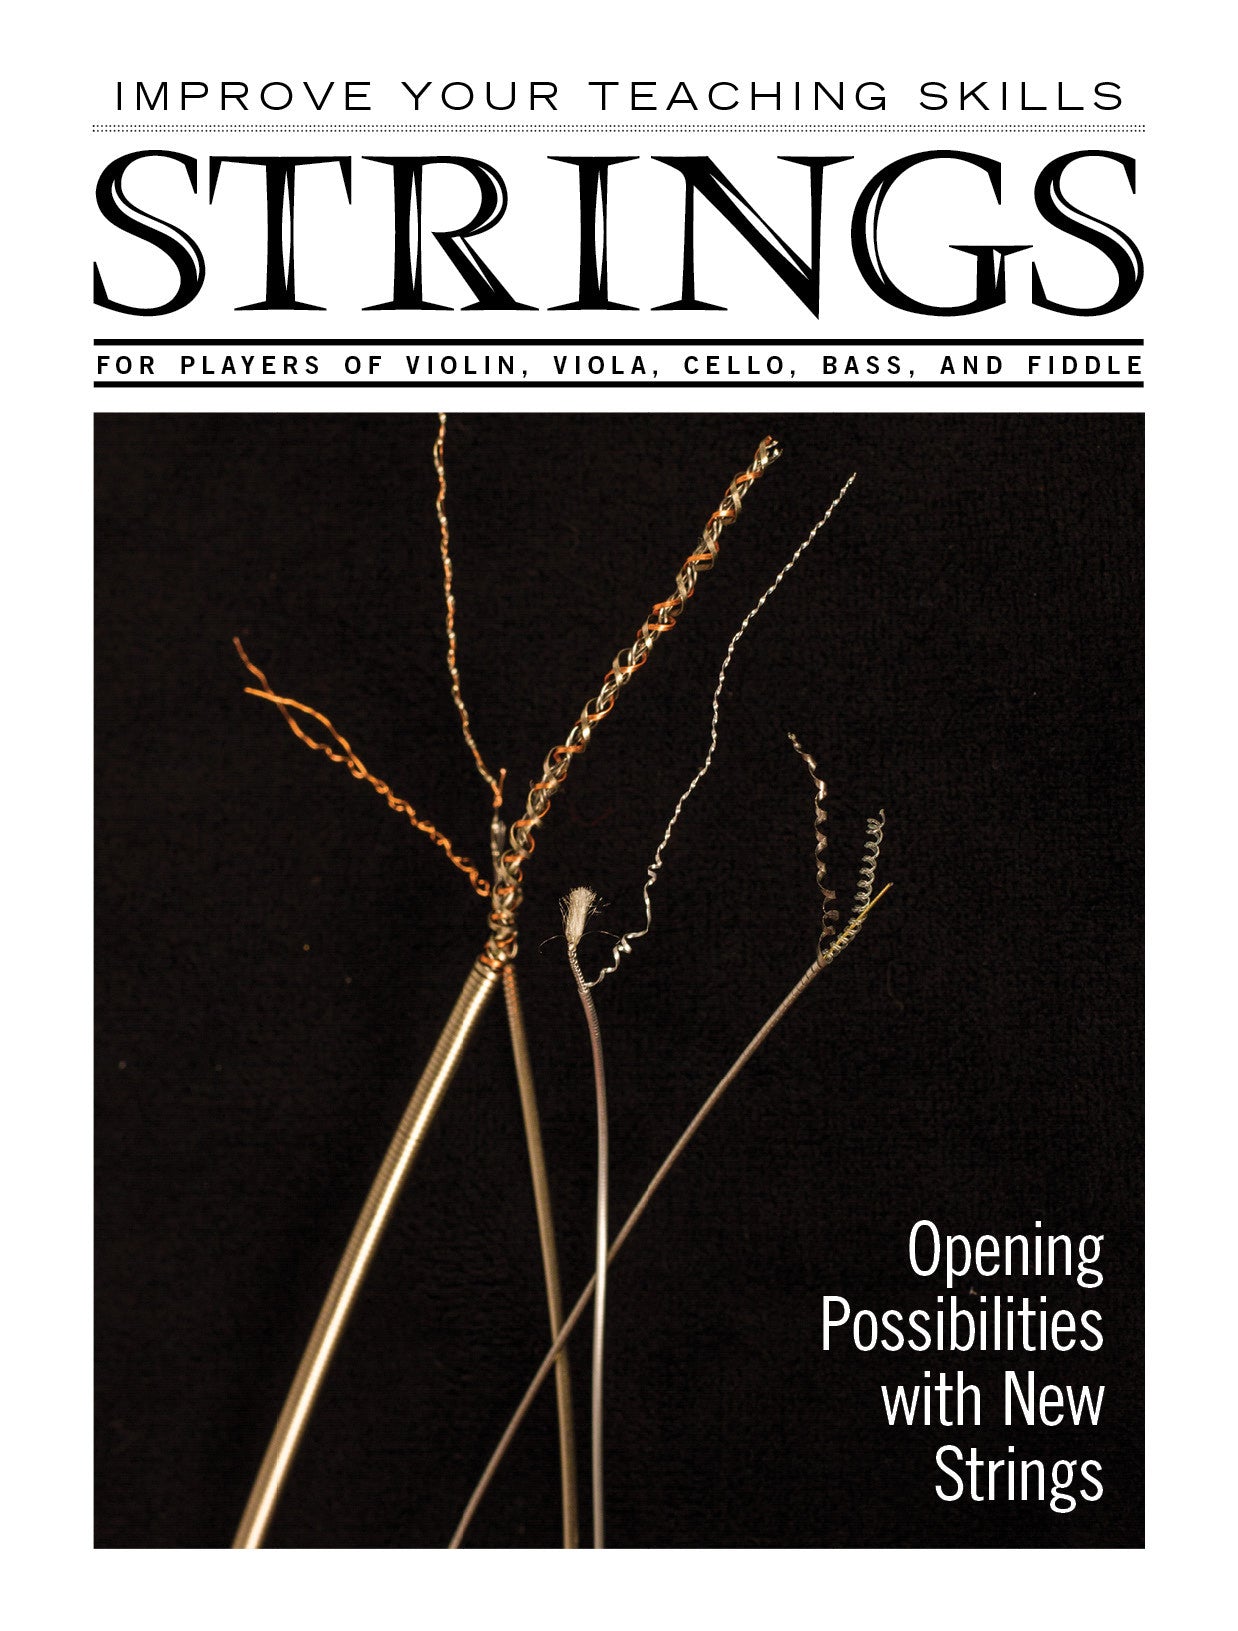 Improve Your Teaching Skills:  Opening Possibilities with New Strings